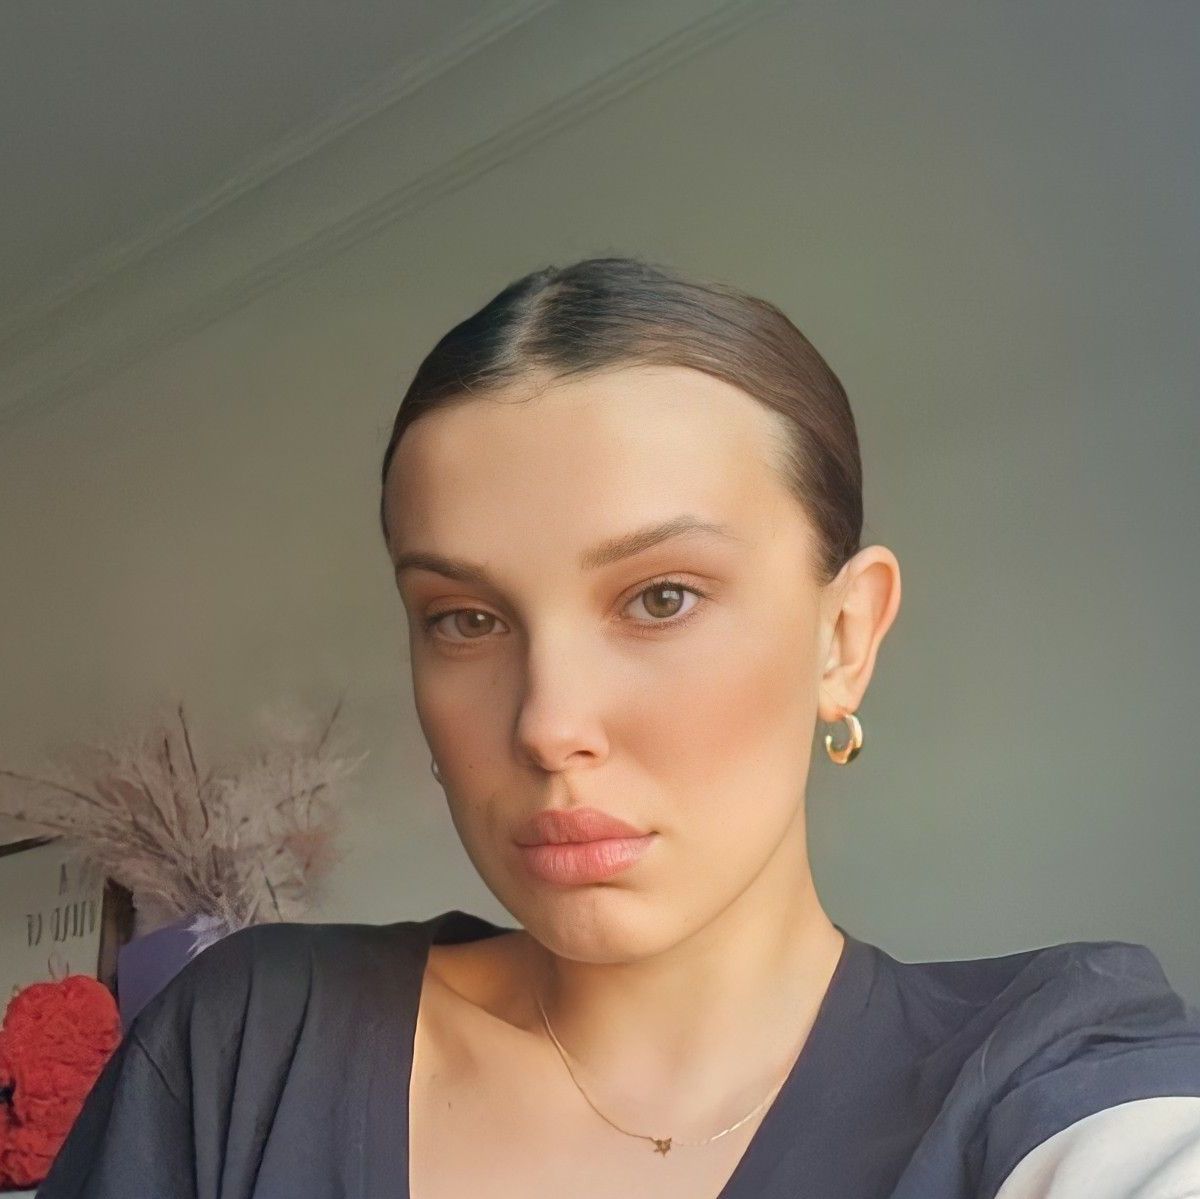 Why Millie Bobby Brown is your new style icon